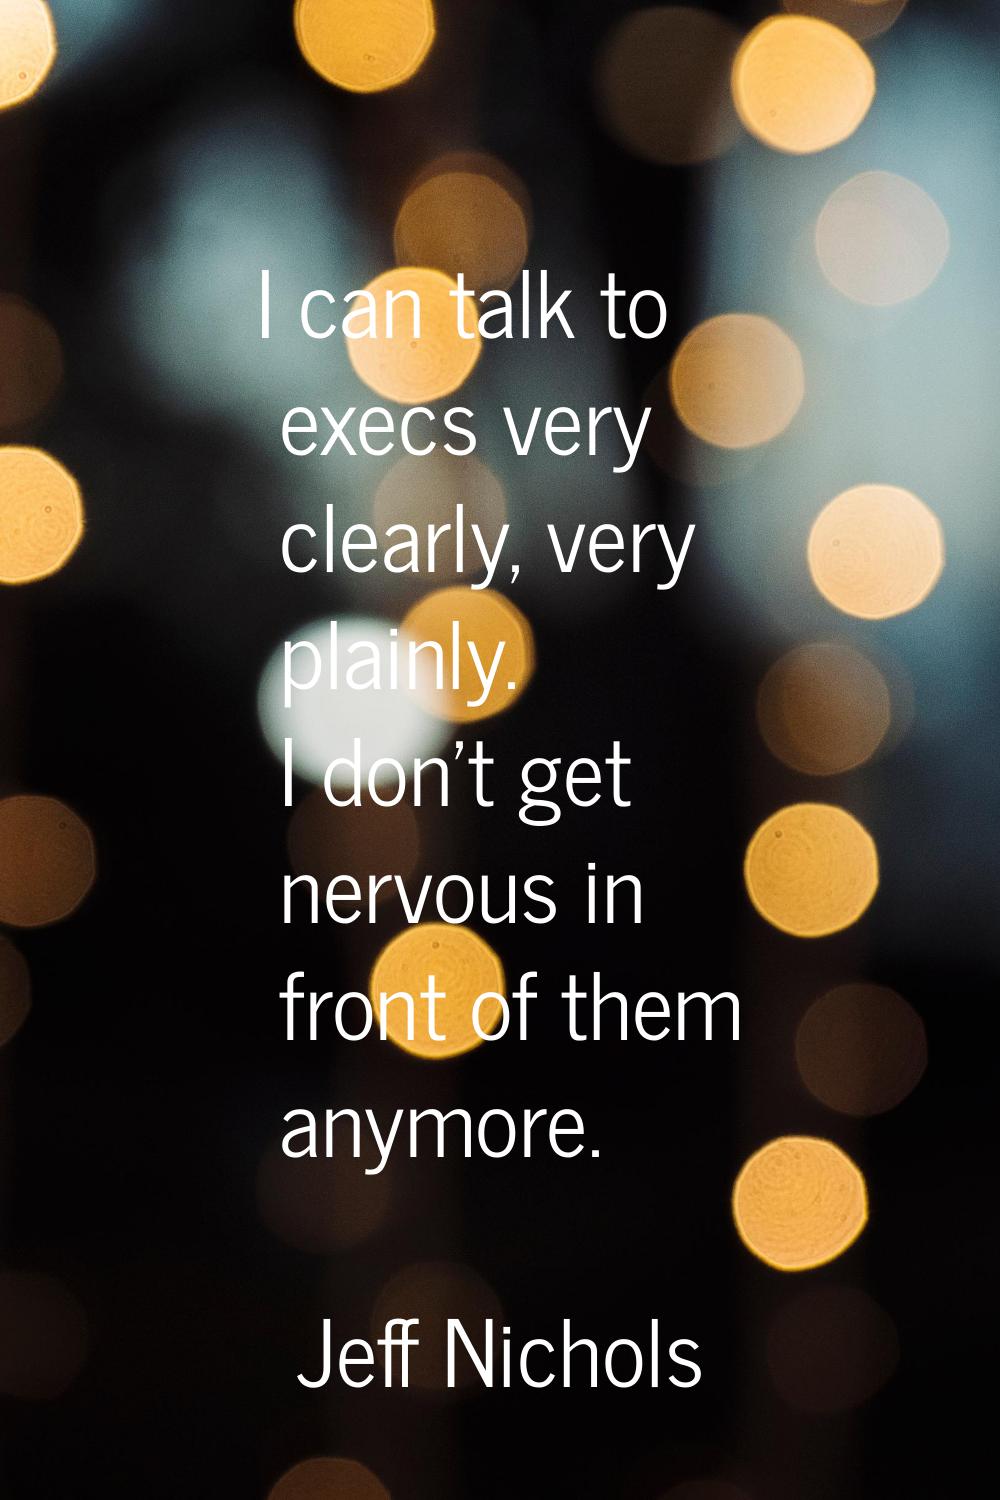 I can talk to execs very clearly, very plainly. I don't get nervous in front of them anymore.